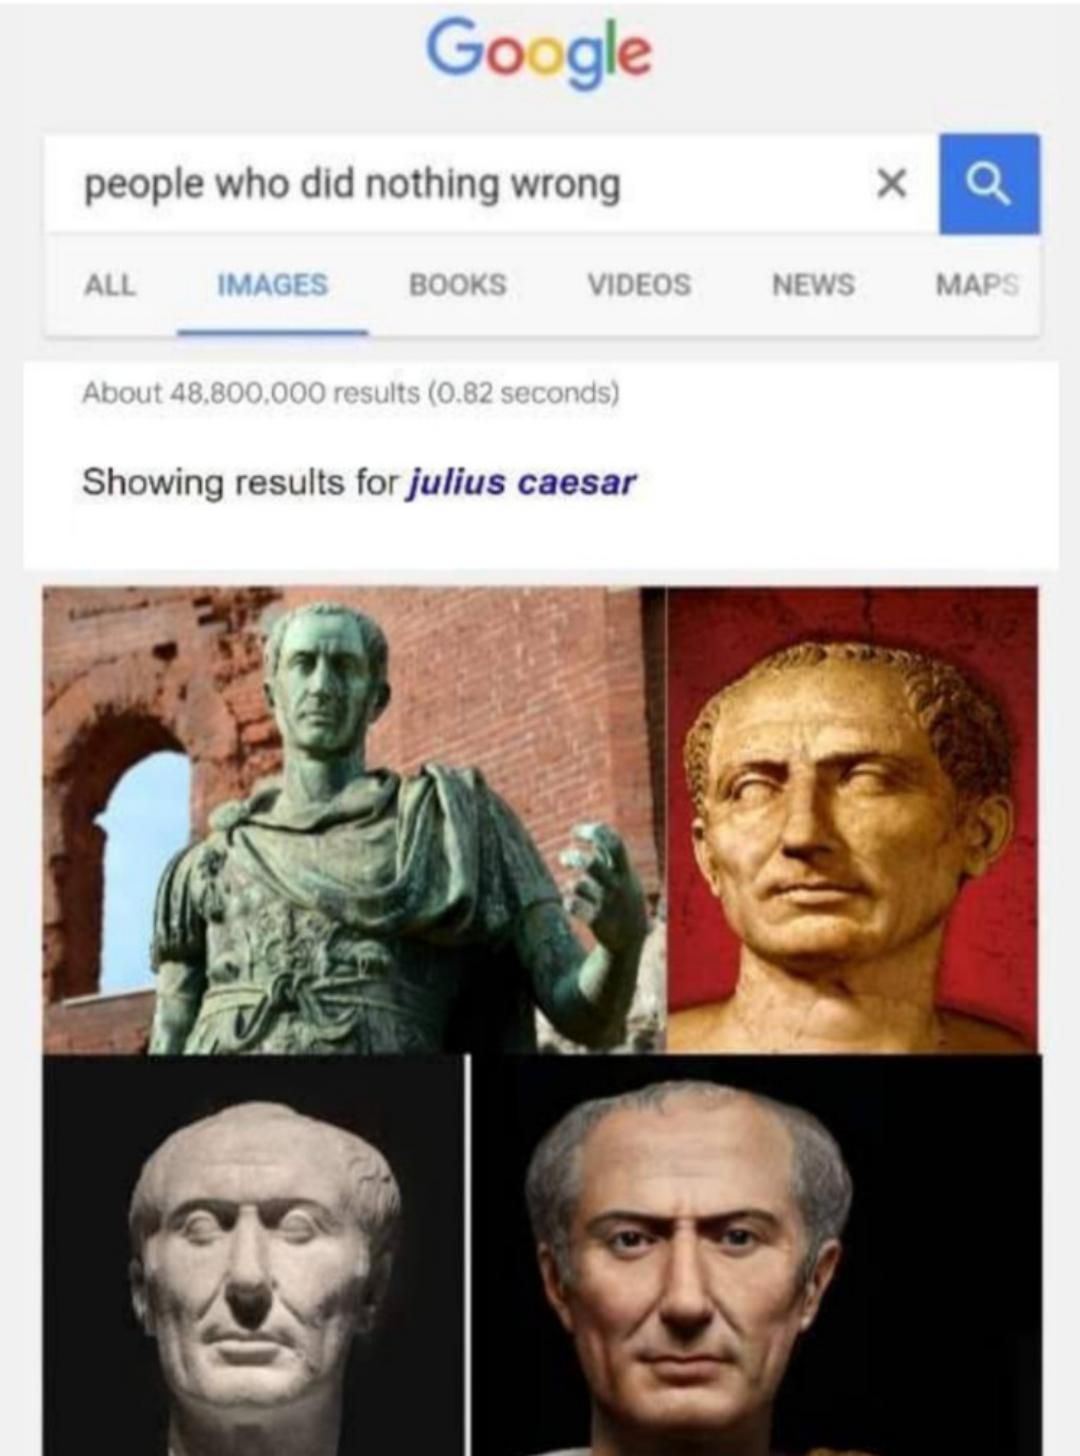 Google knows what's up. Julius Caesar did nothing wrong. Change my mind.